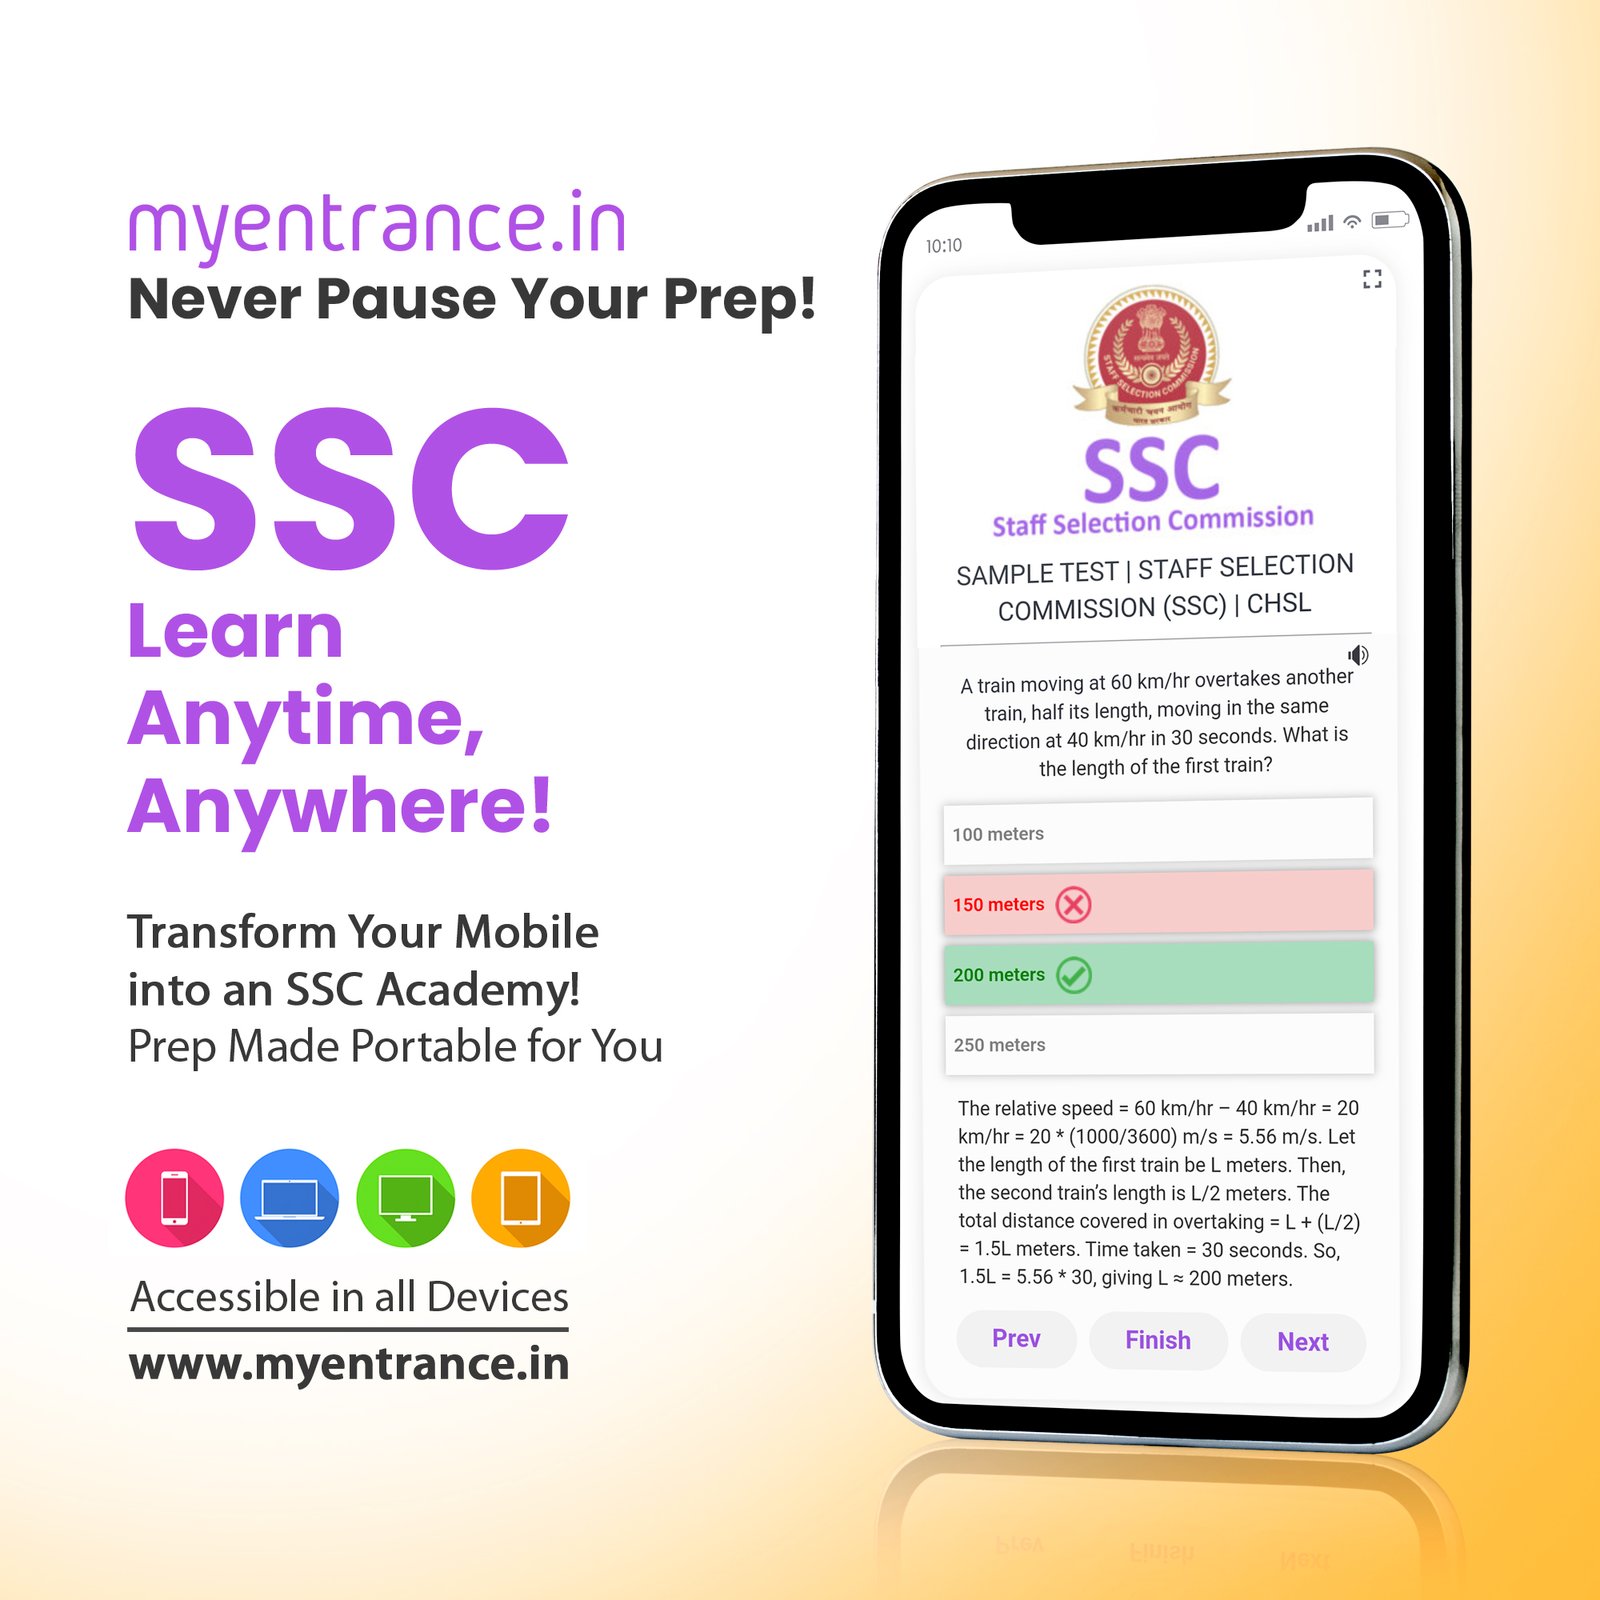 SSC Online Preparation
SSC Previous Year Question paper with answers. SSc Mock test at My entrance